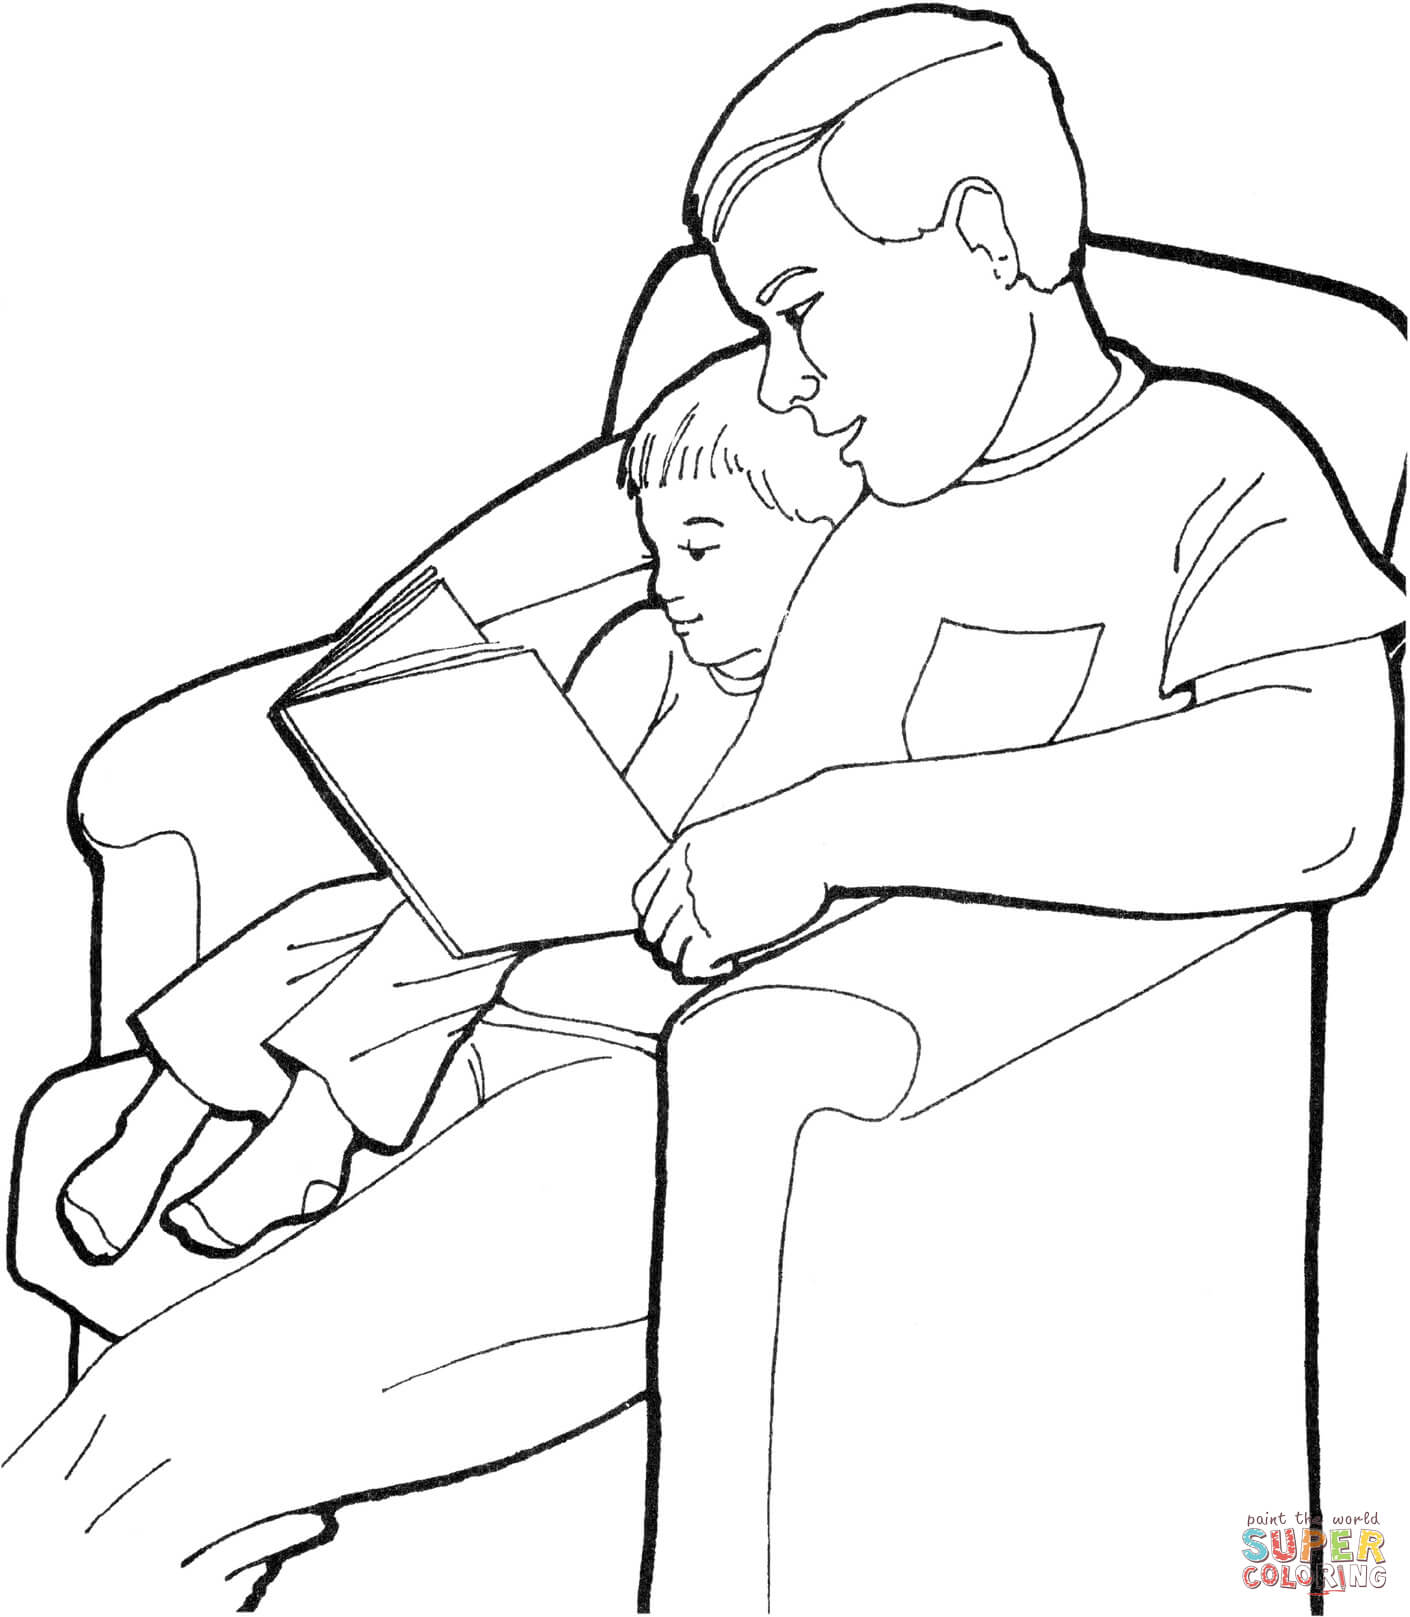 Father With His Son coloring page | Free Printable Coloring Pages